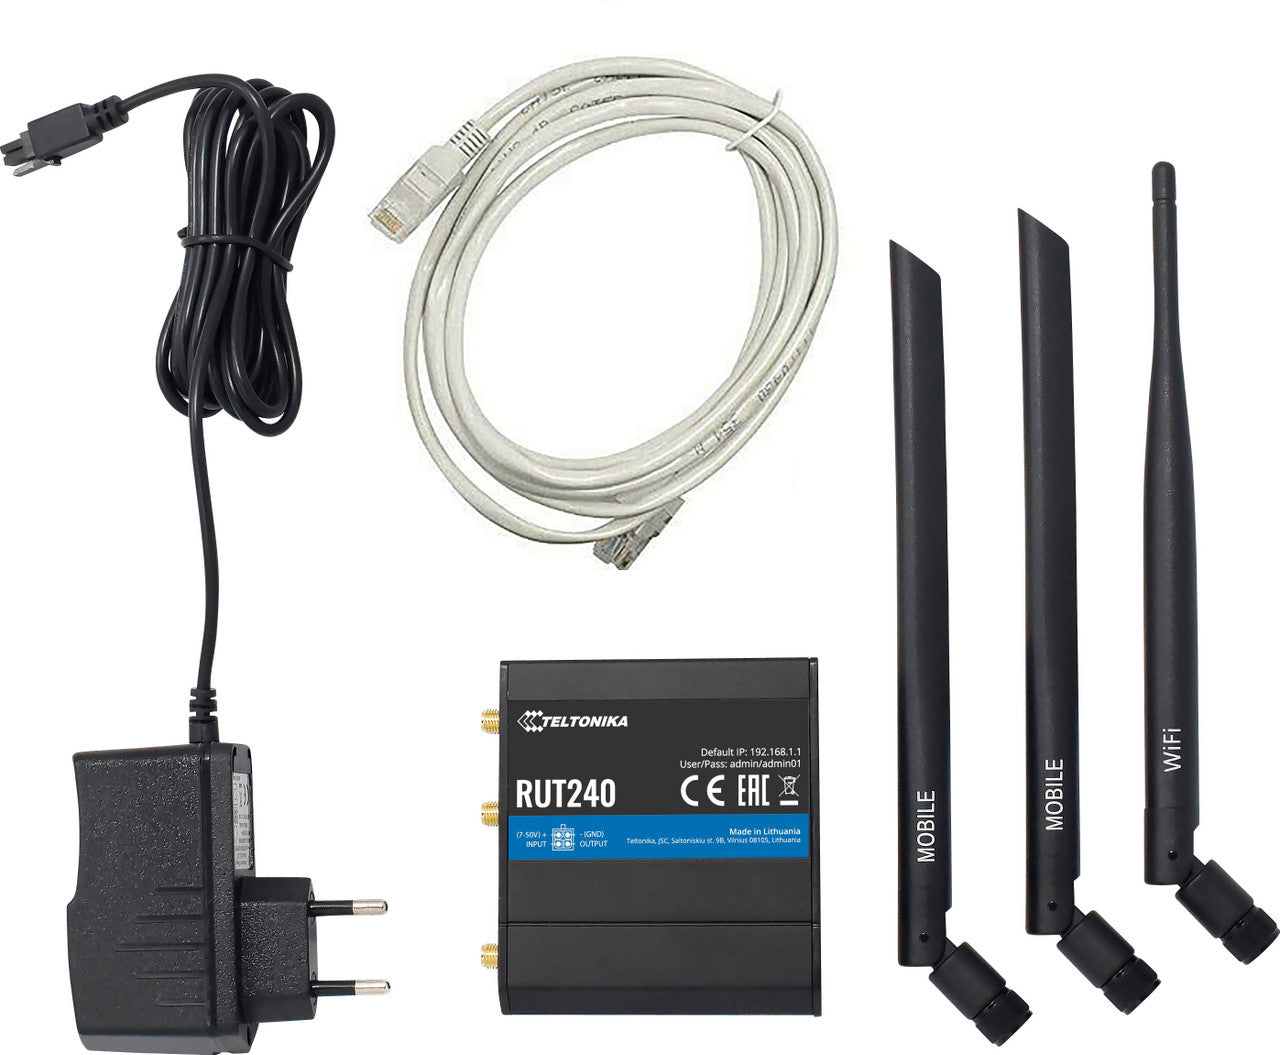 Teltonika RUT24007U000 - RUT240 Router for Mobile Network (Global Version - All US Carriers)